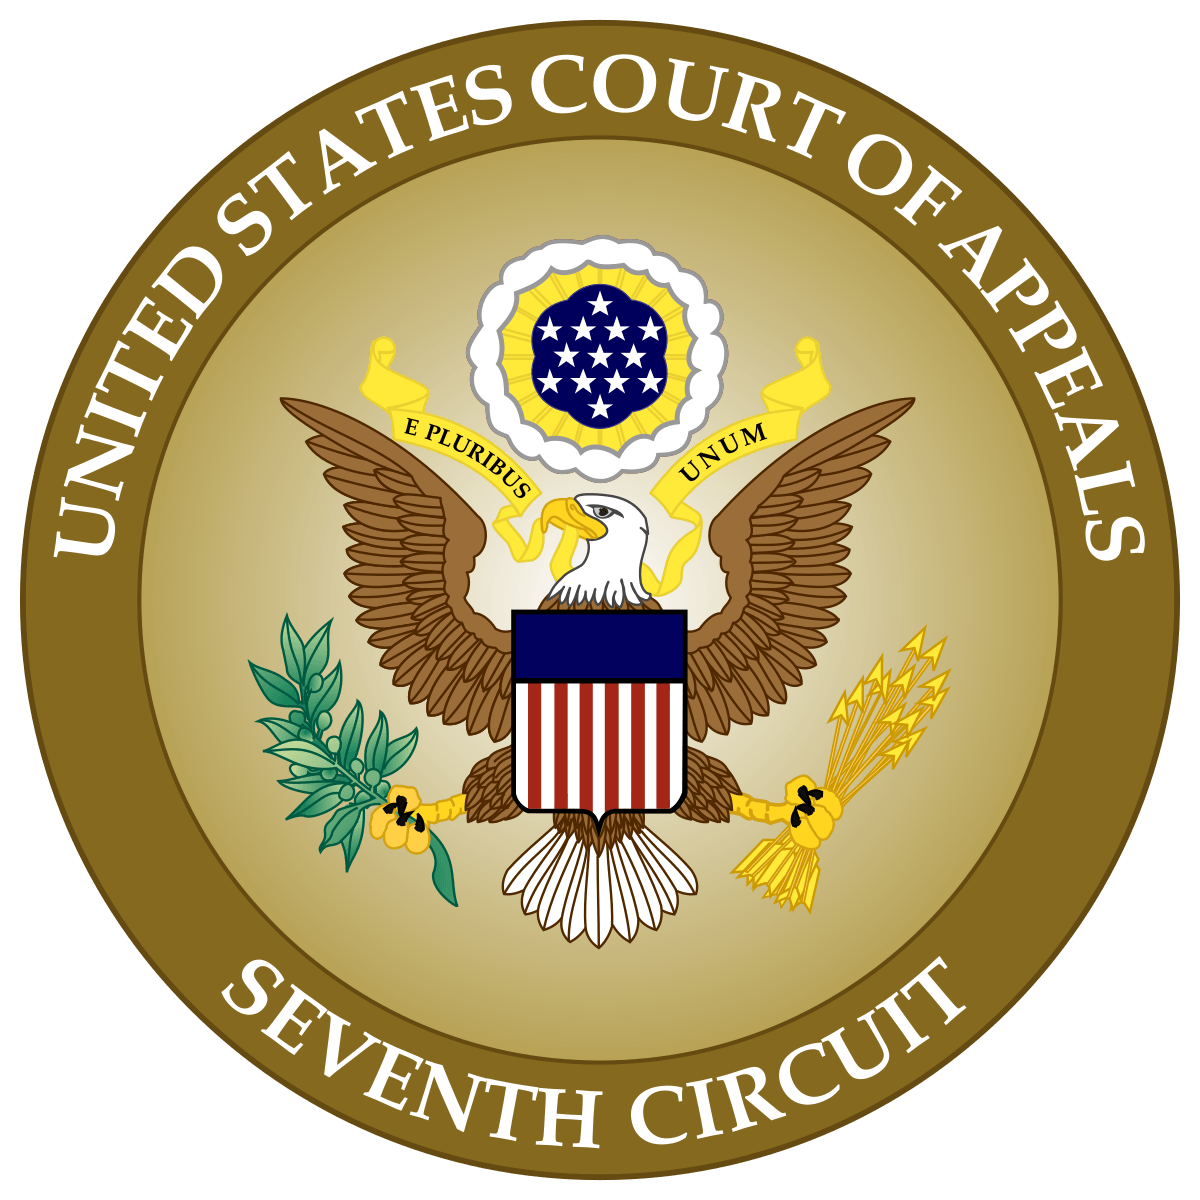 Court State of Indiana Logo - United States Court of Appeals for the Seventh Circuit